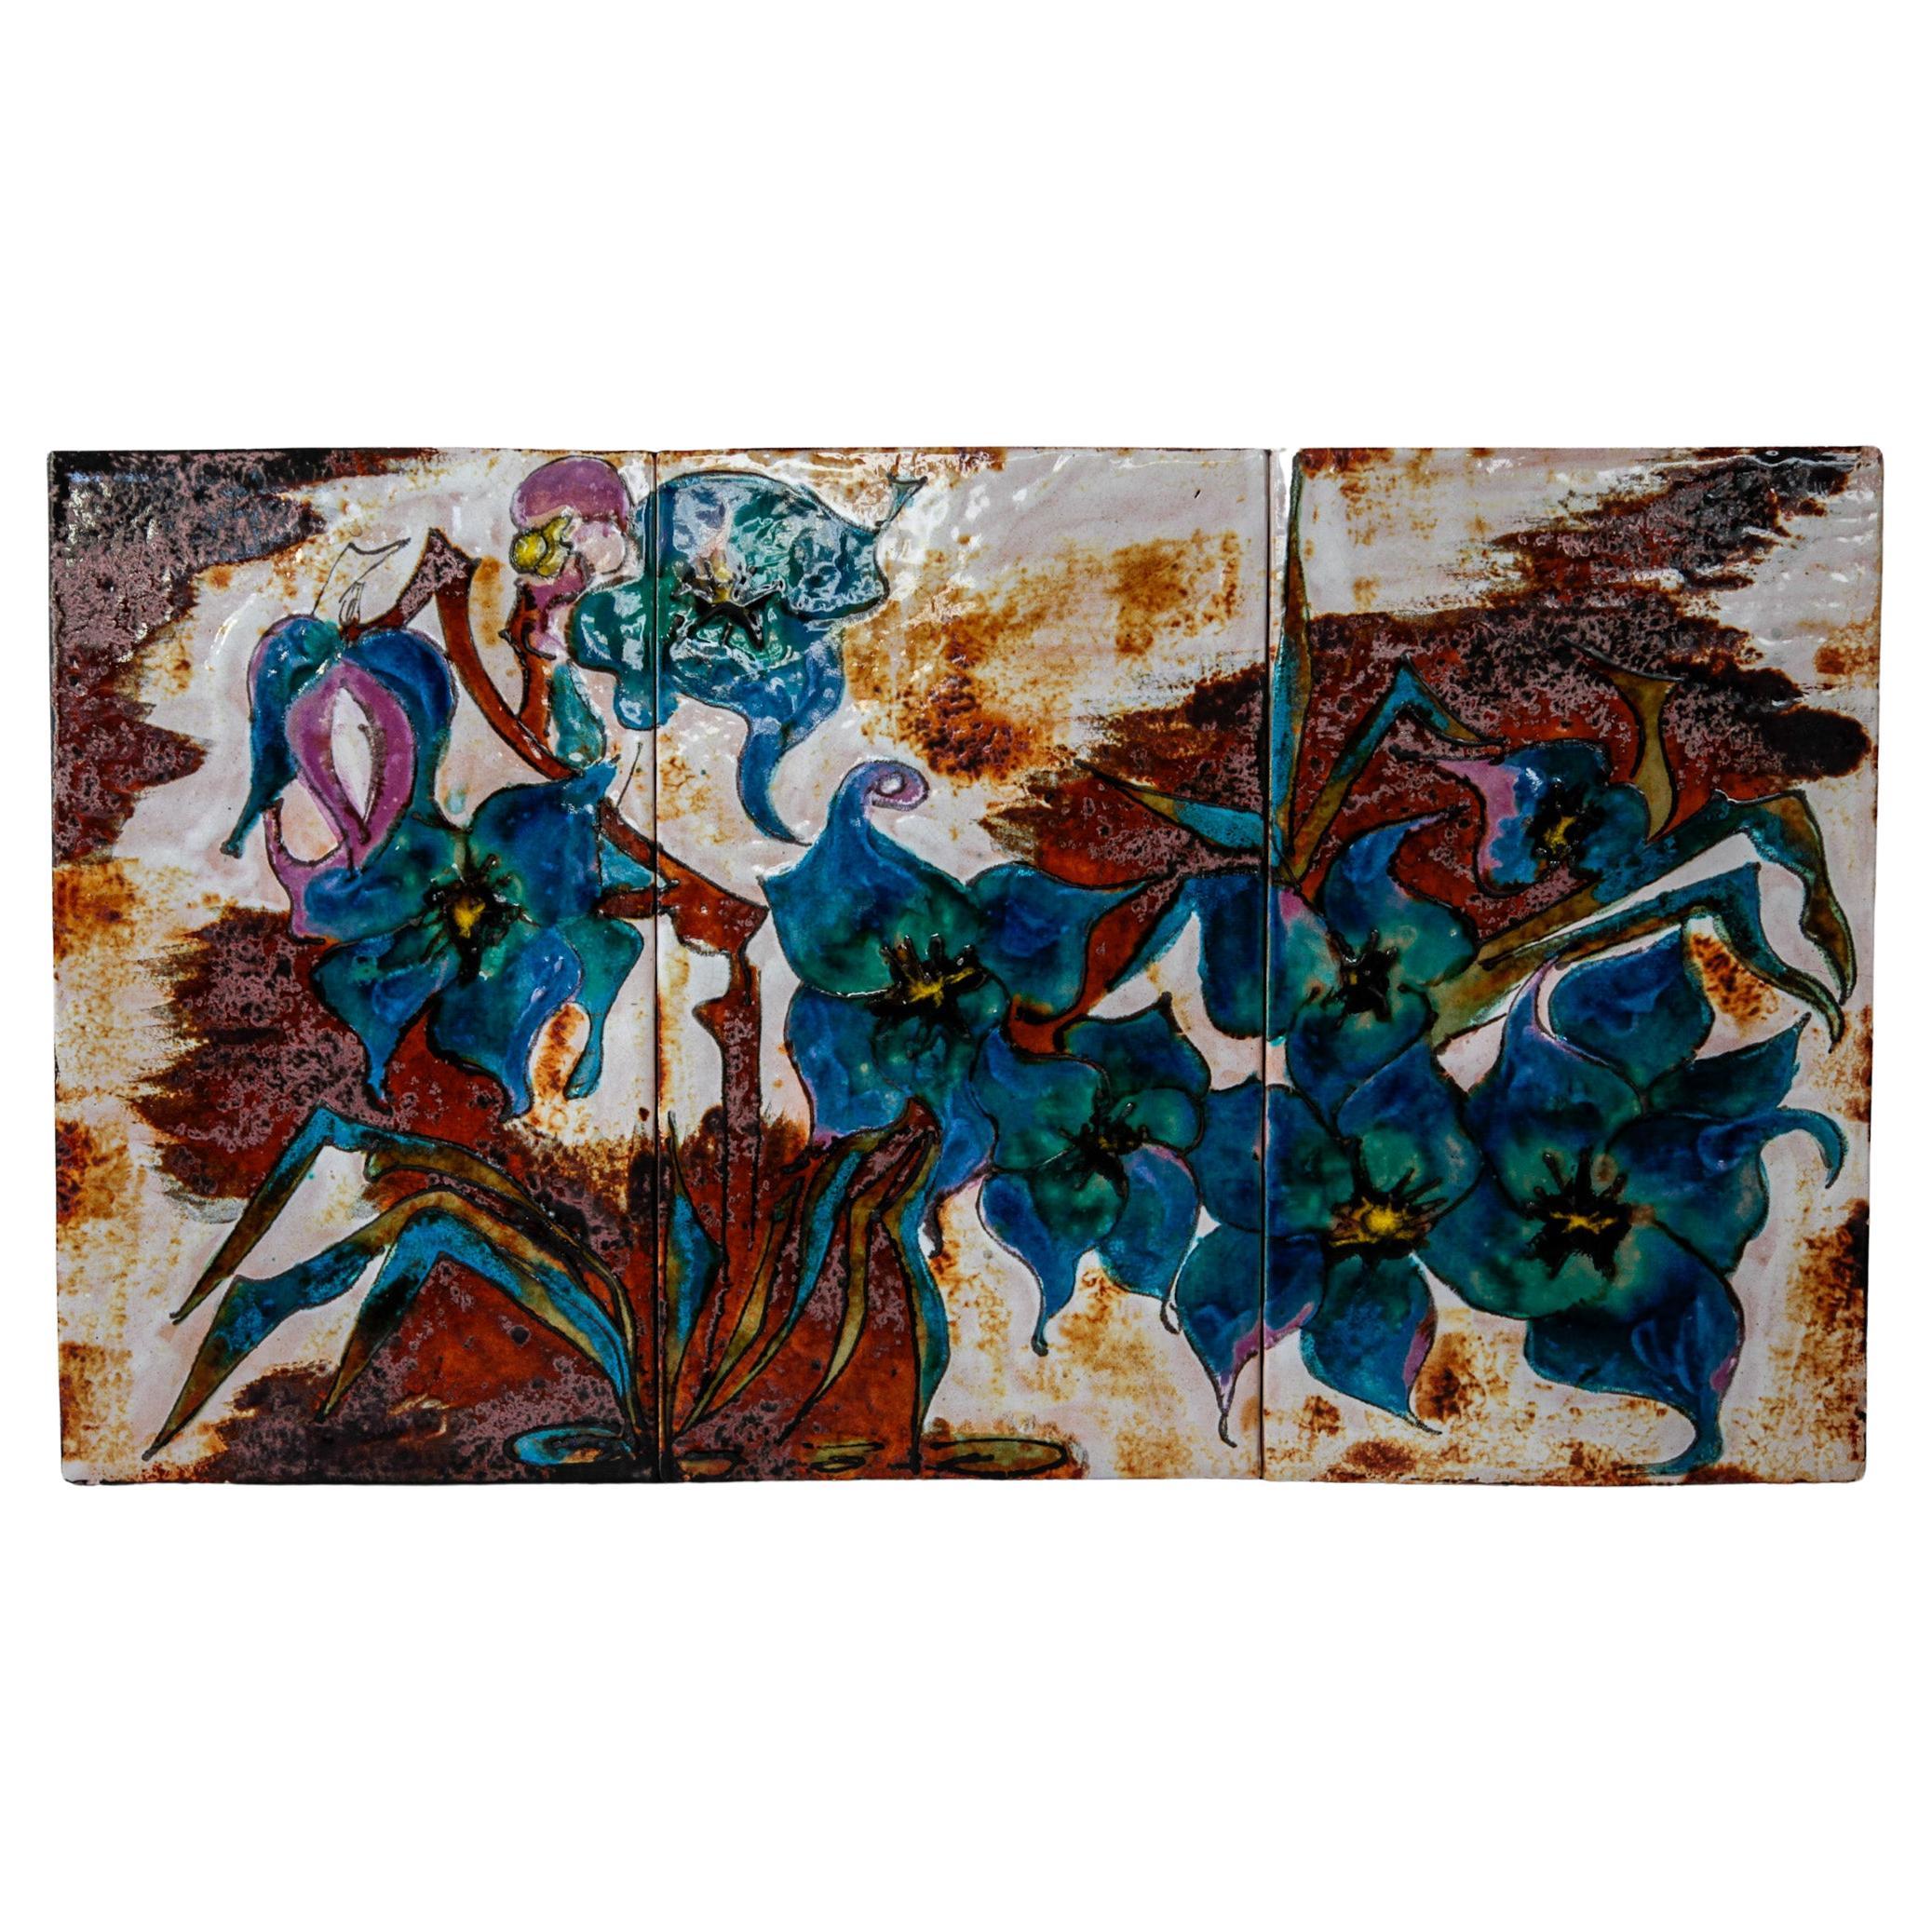 Incredibly beautiful flower arrangement on a ceramic tile with a gloss of glaze in the brightly colors blue, pink and brown. Three separately baked tiles mounted on a wooden frame. This tall ceramic tile plaque was made in West Germany in the 1960s.